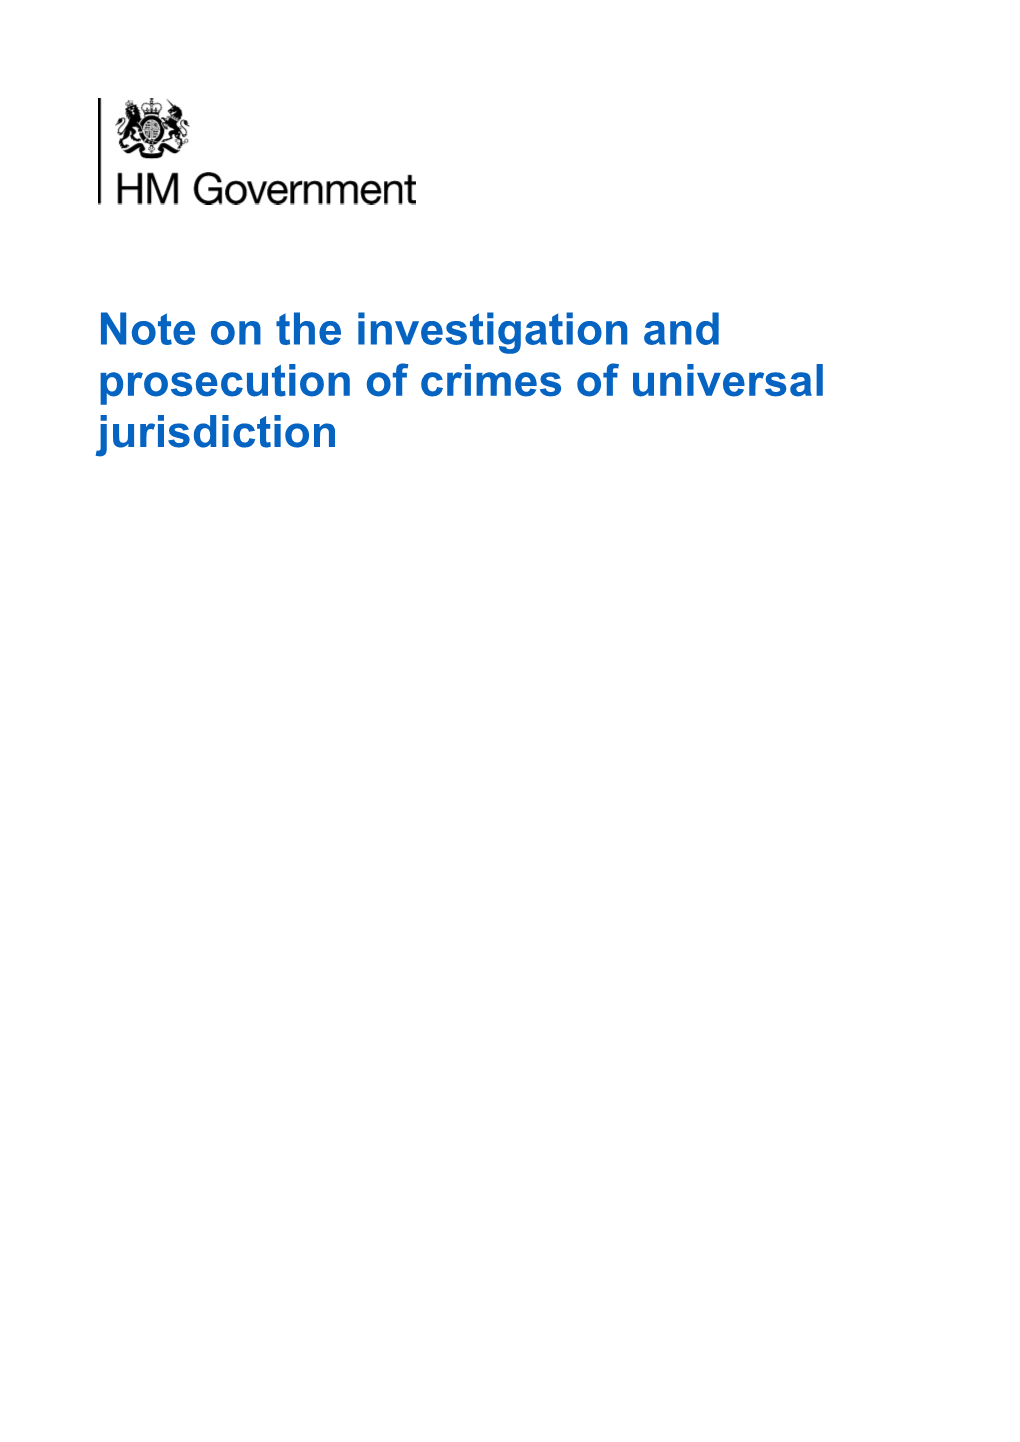 Note on the Investigation and Prosecution of Crimes of Universal Jurisdiction